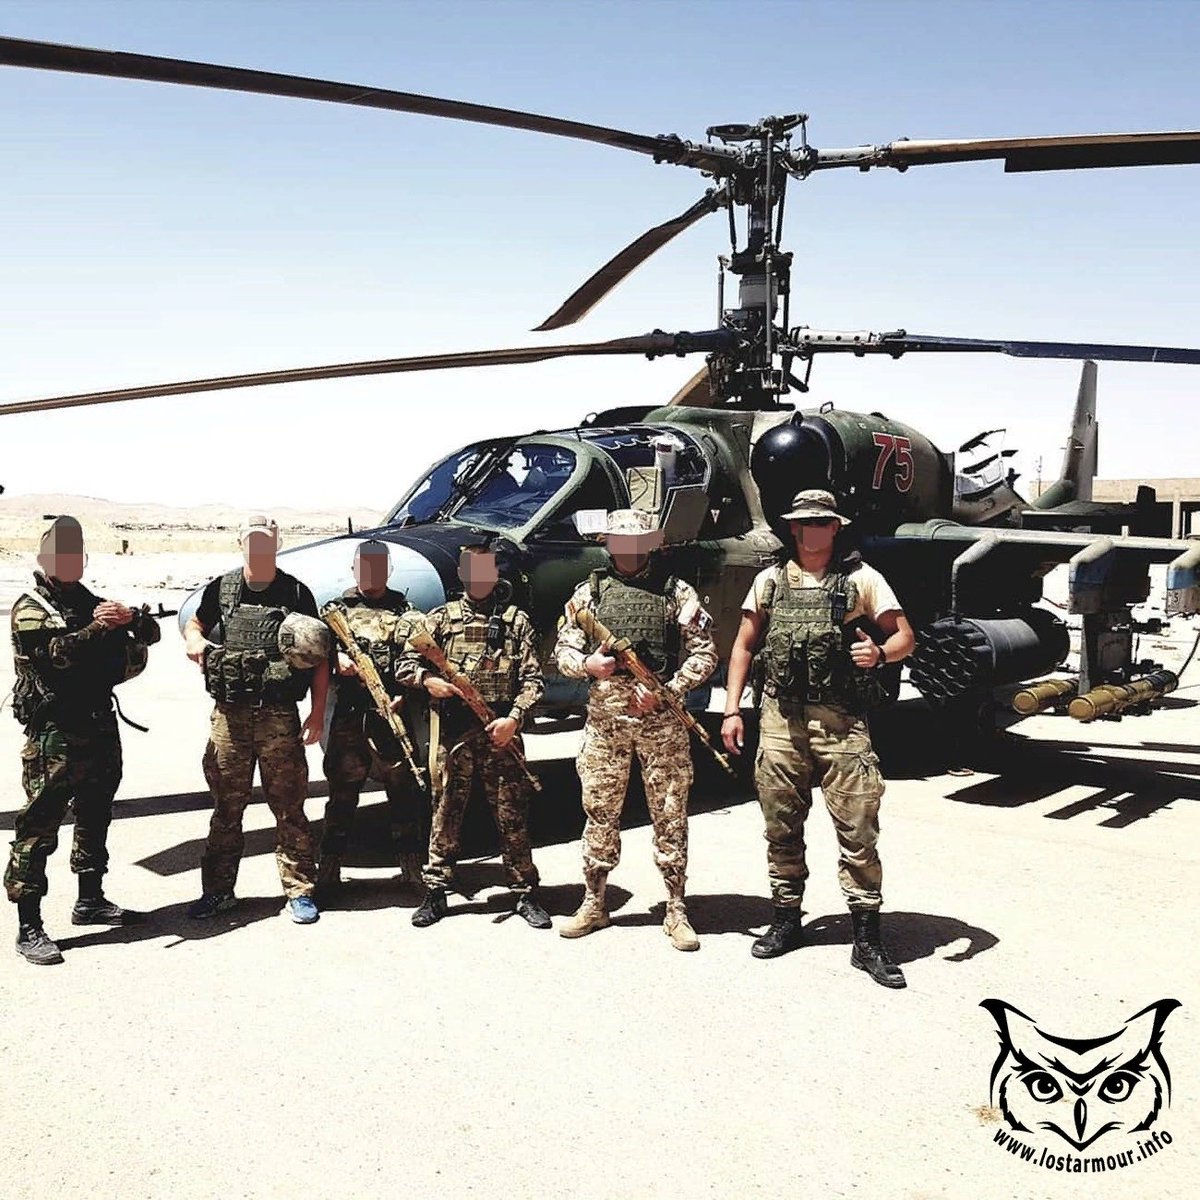 Russian spetsnaz or razvedchiki in front of a Ka-52 helicopter (red 75) in Syria. The Ka-52 has two Ataka ATGMs equipped and a B-8V-20 rocket pod. 29/ https://vk.com/russian_sof?z=photo-138000218_457266389%2Falbum-138000218_00%2Frev